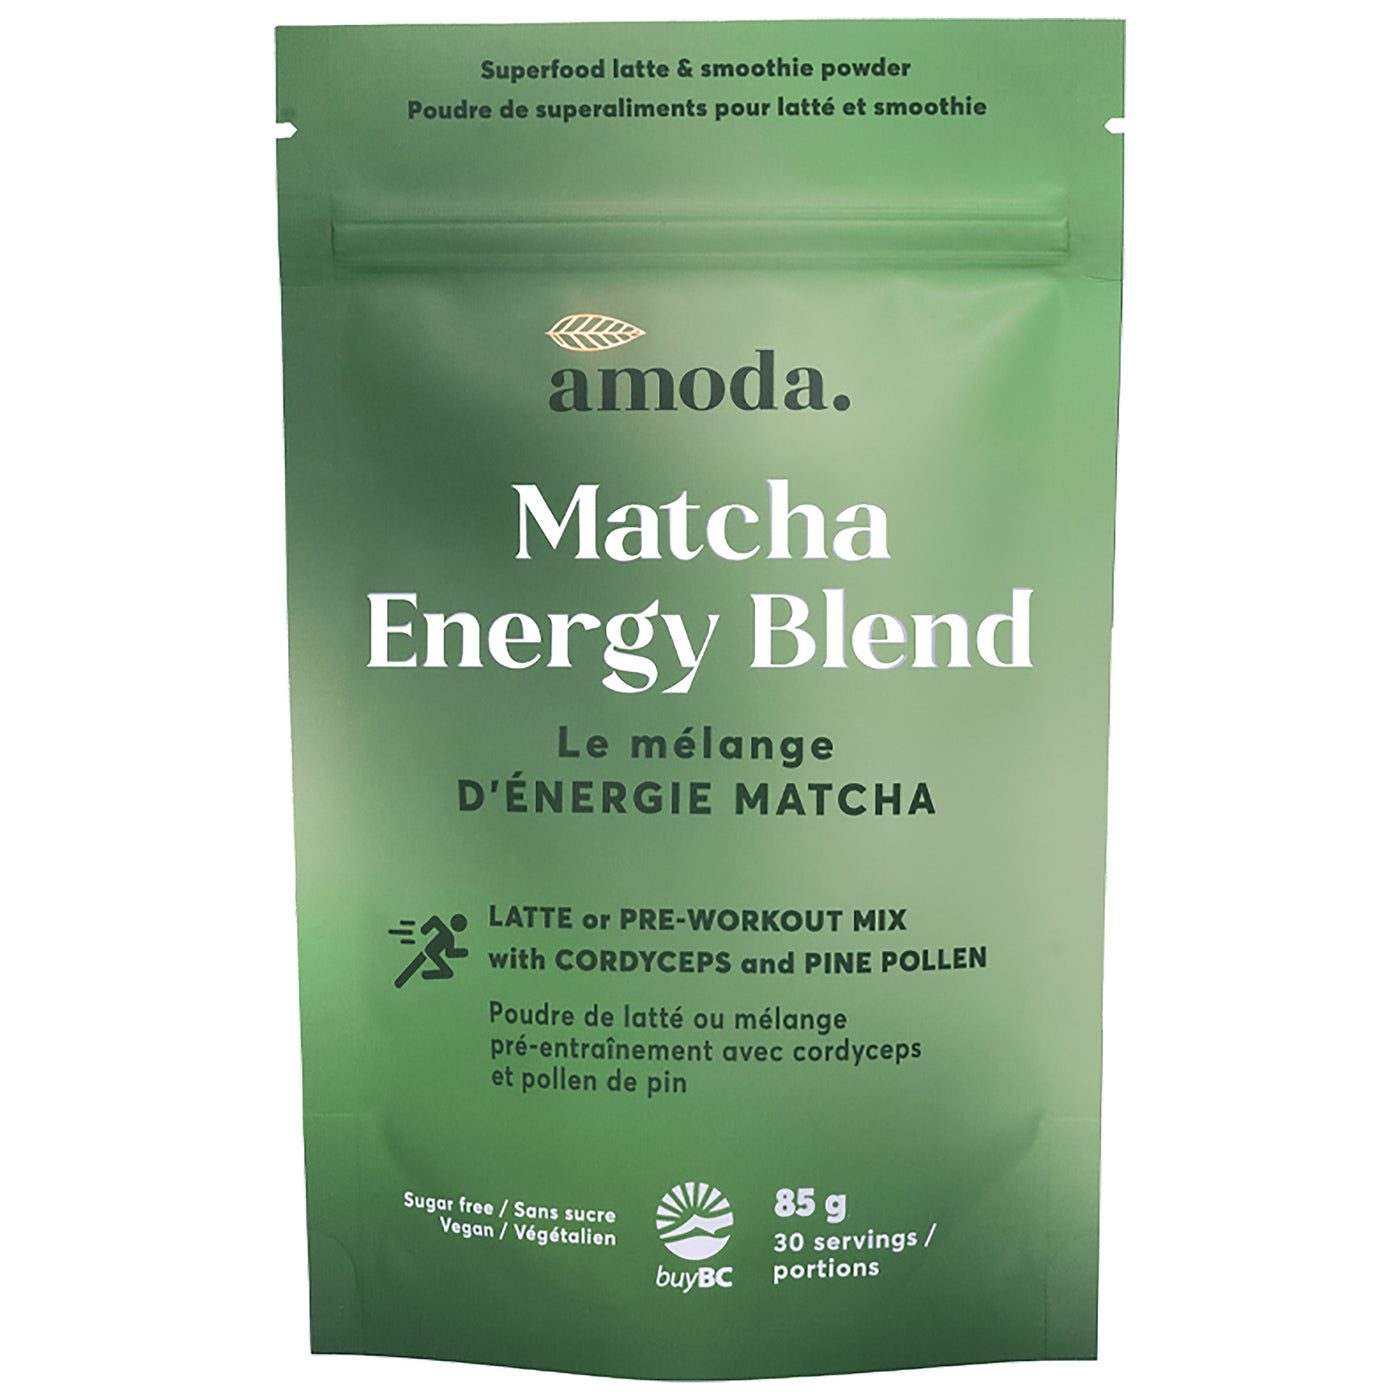 7 Pre-Workout Matcha Recipes to Boost Endurance & Accelerate Weight Loss